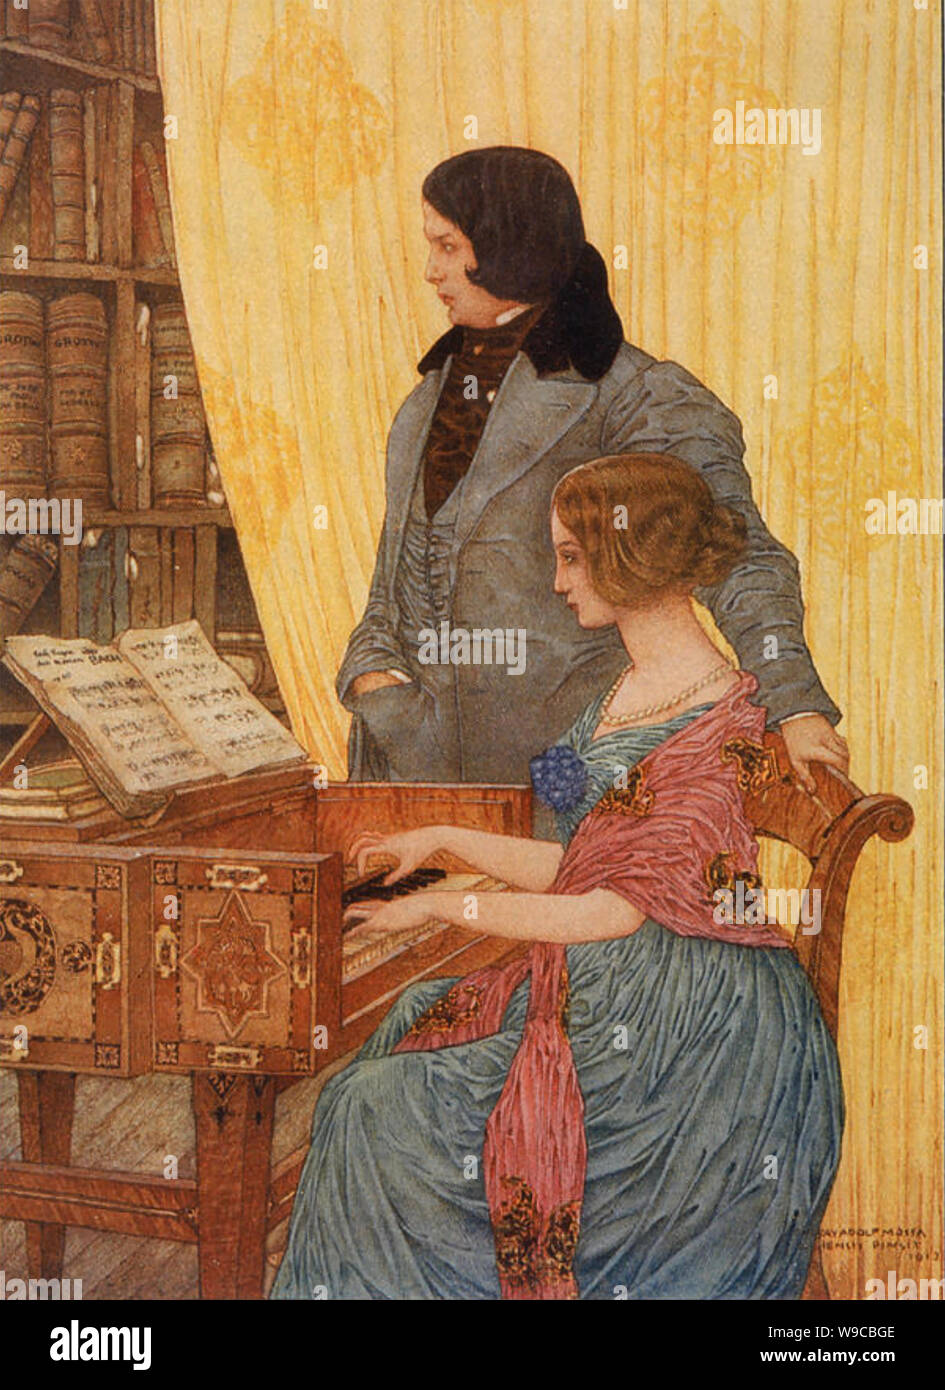 ROBERT and CLARA SCHUMANN German composers about 1840 Stock Photo